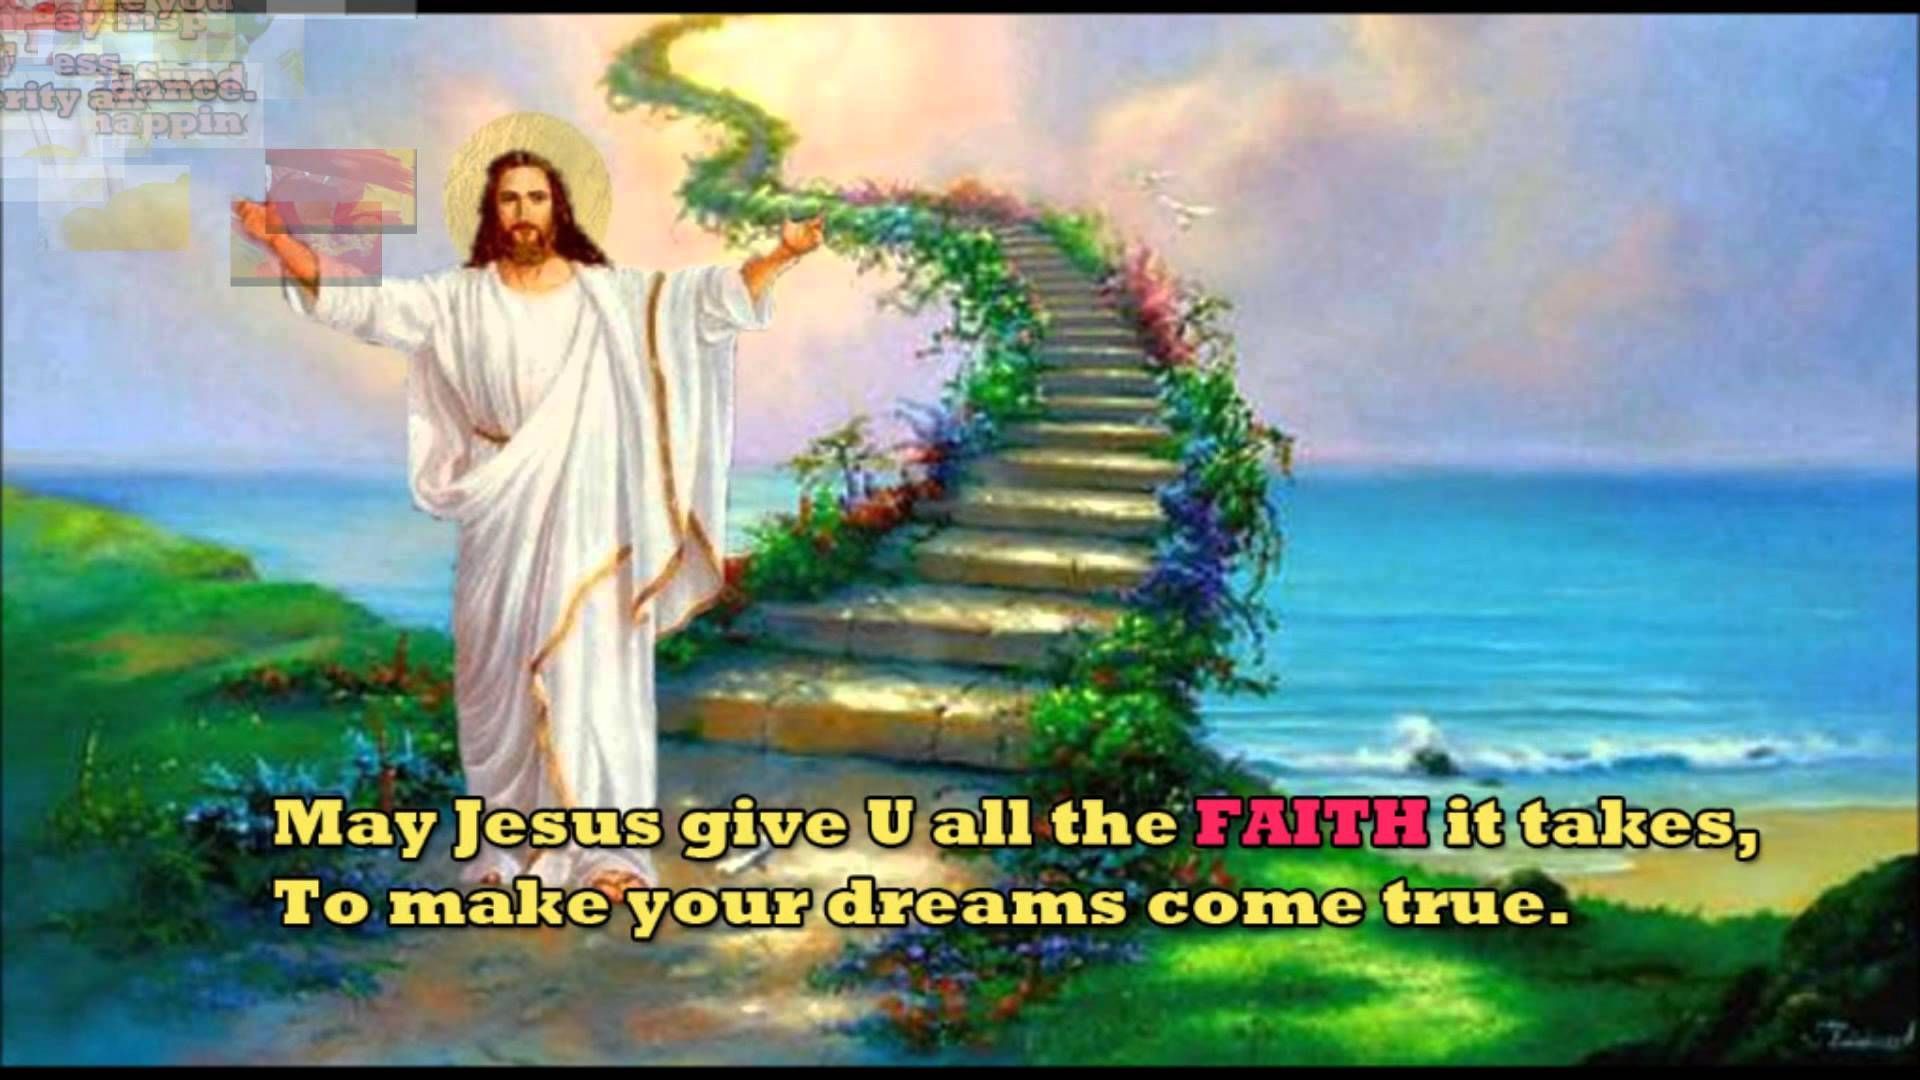 easter2016 Hapy Easter 2016 Jesus Blessings Message Picture. Easter quotes funny, Easter quotes, Happy easter funny image